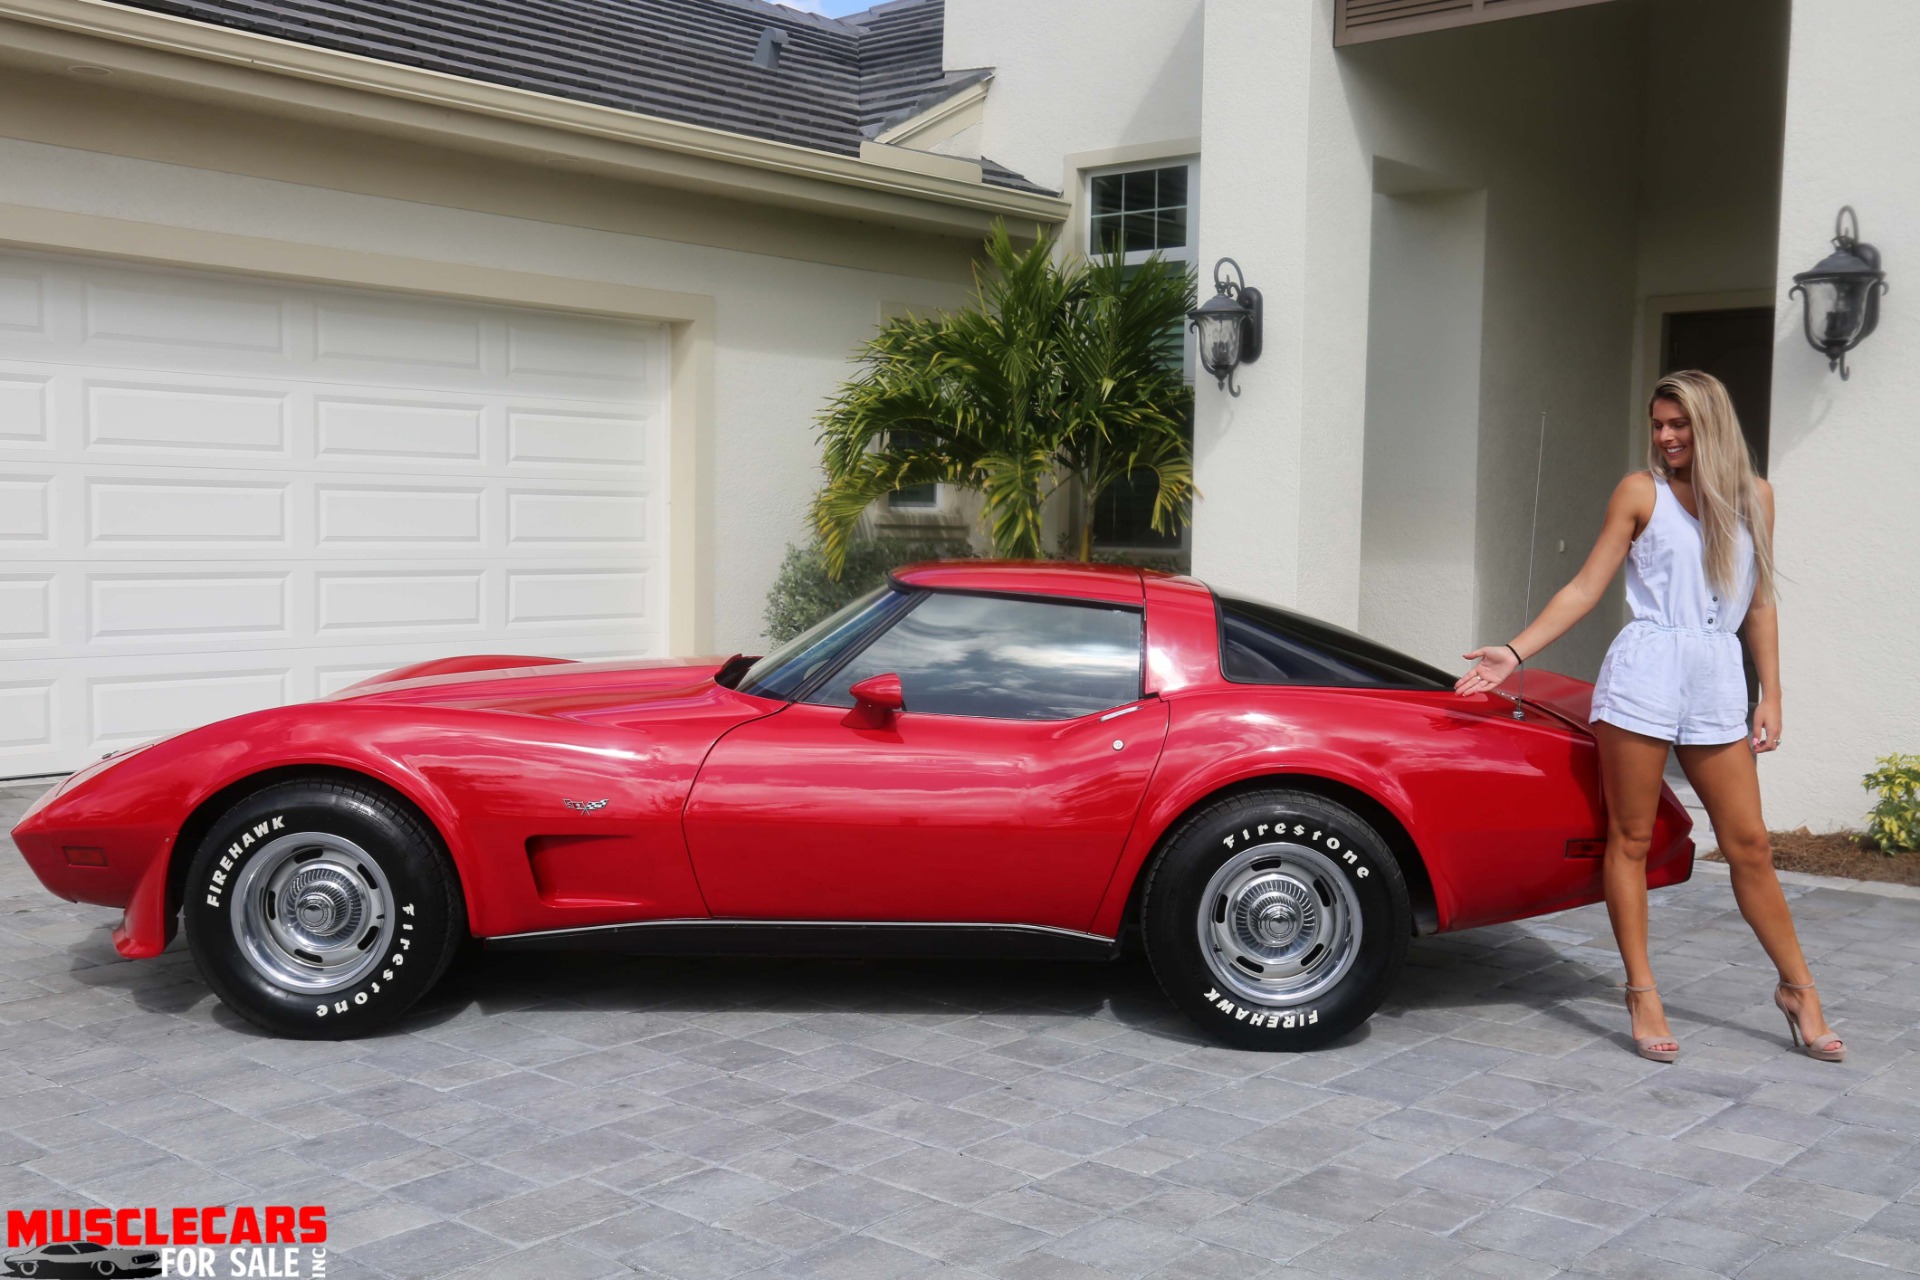 Used 1979 Chevrolet Corvette Stingray For Sale ($17,000) | Muscle Cars